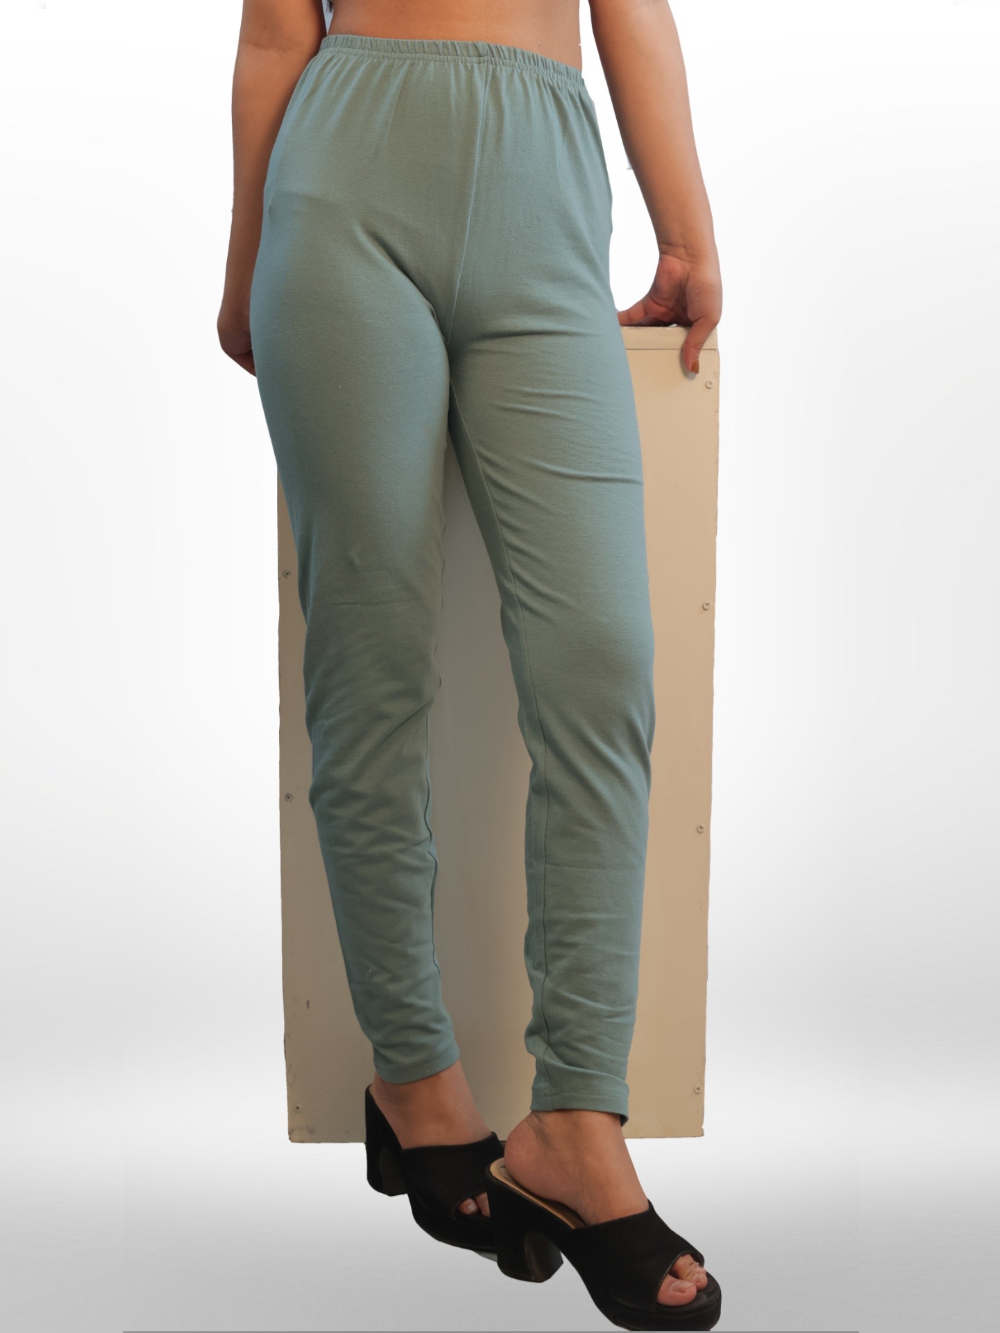 Ladies Stretchy Skinny Tils Pant for Woman - Legacy Boutiques